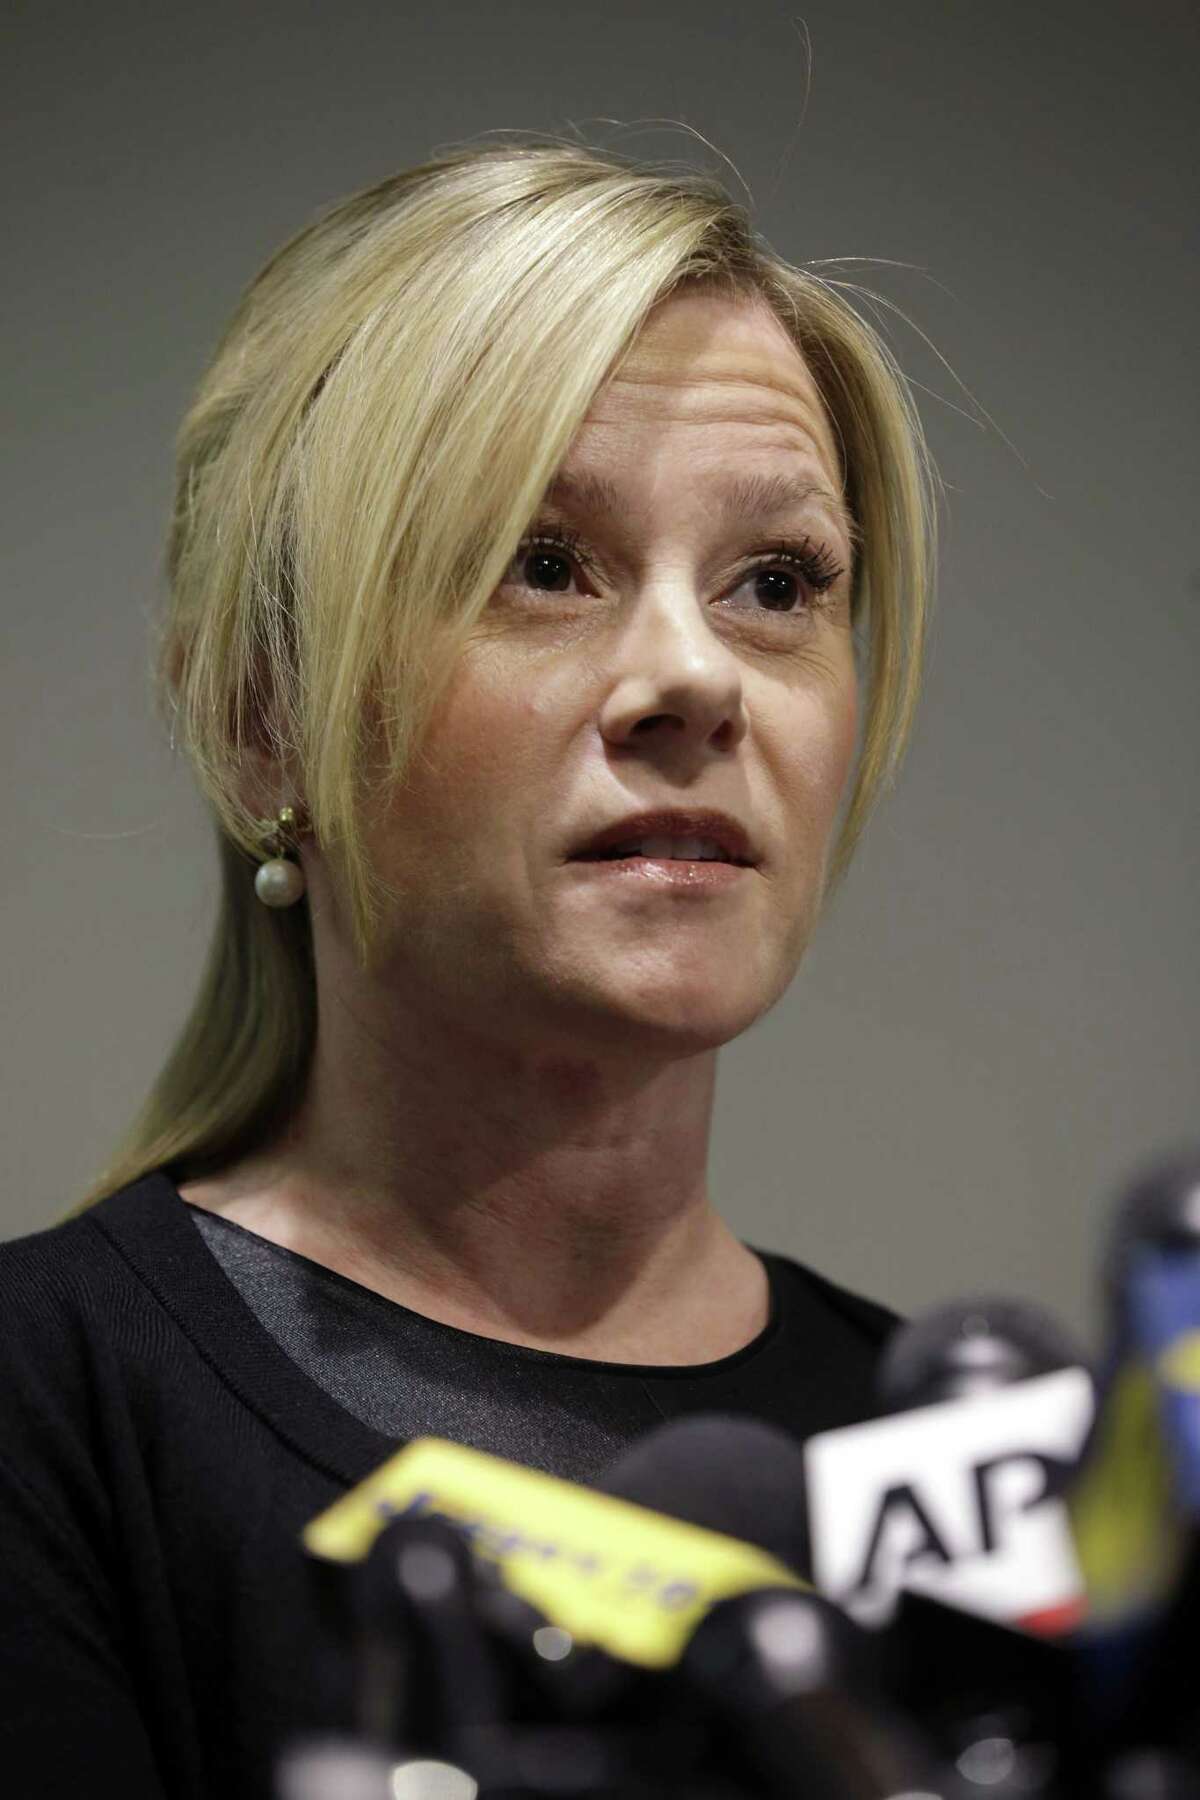 Bridget Anne Kelly, New Jersey Gov. Chris Christie’s former deputy chief of staff, speaks at a news conference where she denied any in the wrongdoing George Washington Bridge traffic scandal, Friday, May 1, 2015, in Livingston, N.J. Earlier Friday, federal prosecutors brought charges against three former allies of Christie, but not Christie himself, in the George Washington Bridge traffic scandal, easing the legal threat that has hung over his 2016 White House ambitions for more than a year. One of those charged, David Wildstein, a former high-ranking official at the transportation agency that operates the bridge, pleaded guilty and accused the two other defendants, Kelly and Bill Baroni, of joining him in the politically motivated scheme to create huge traffic jams. Kelly and Baroni were charged in an indictment unsealed later Friday.